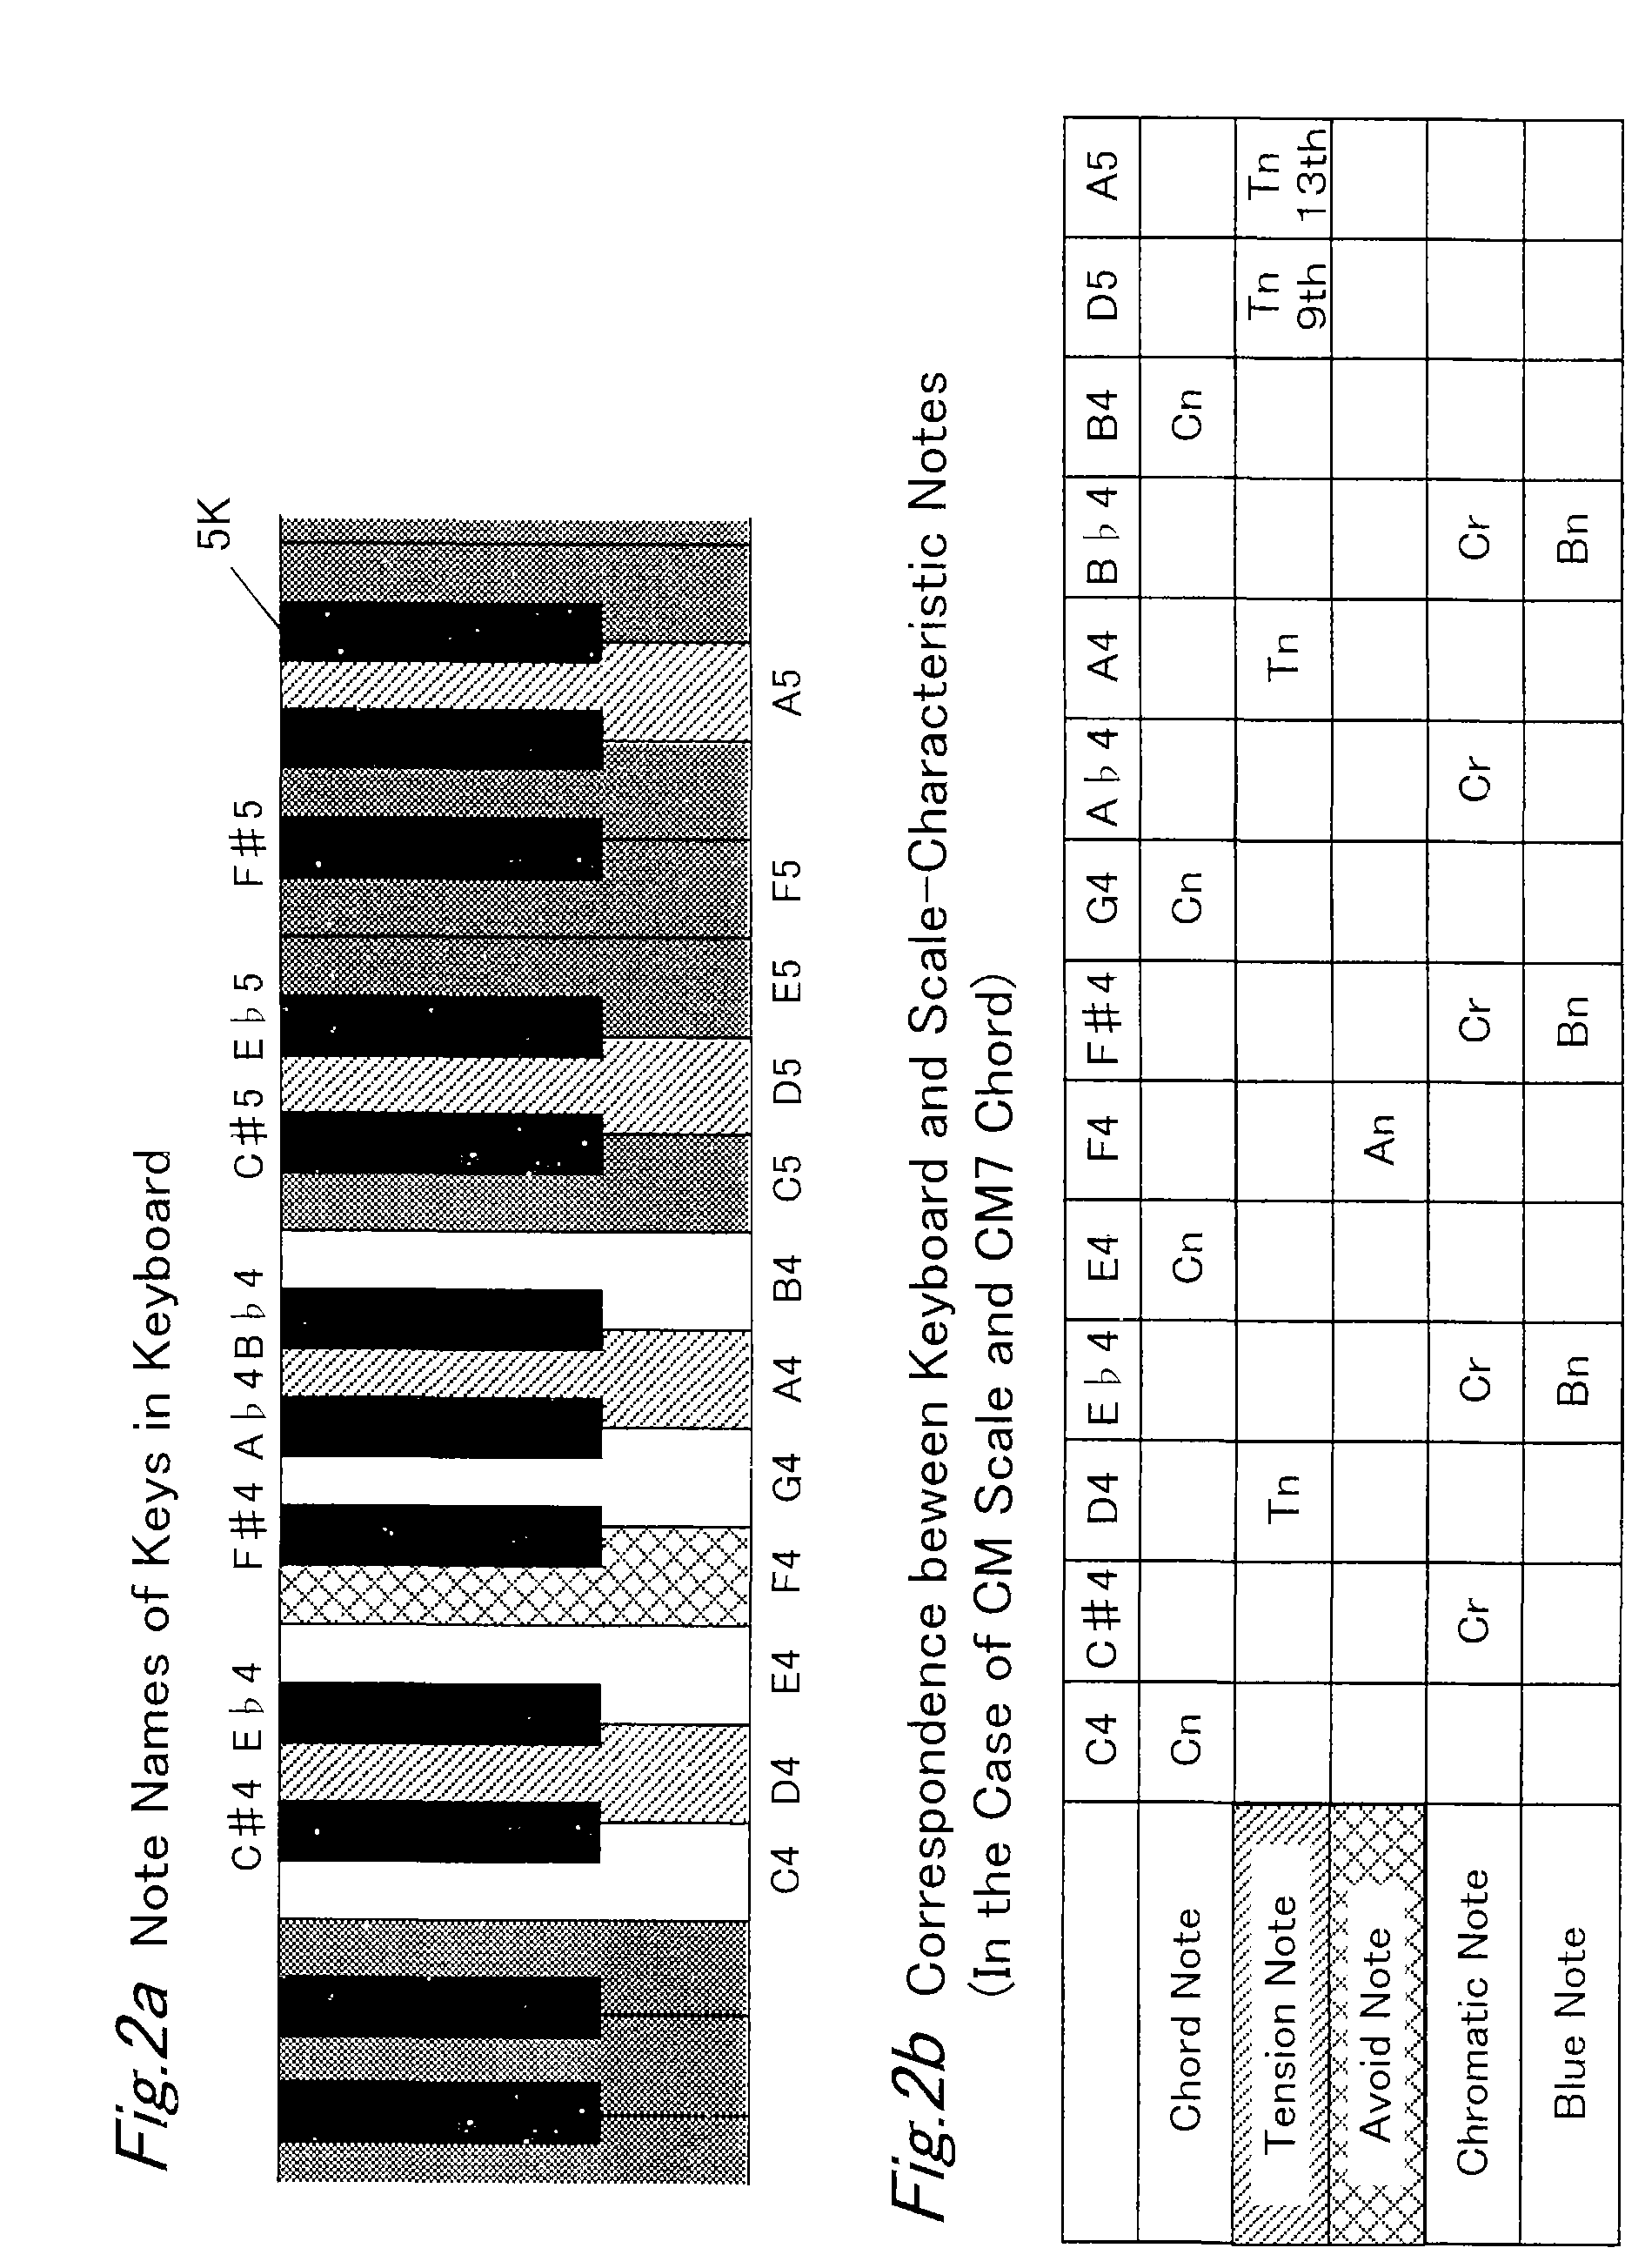 Electronic keyboard musical instrument for assisting in improvisation